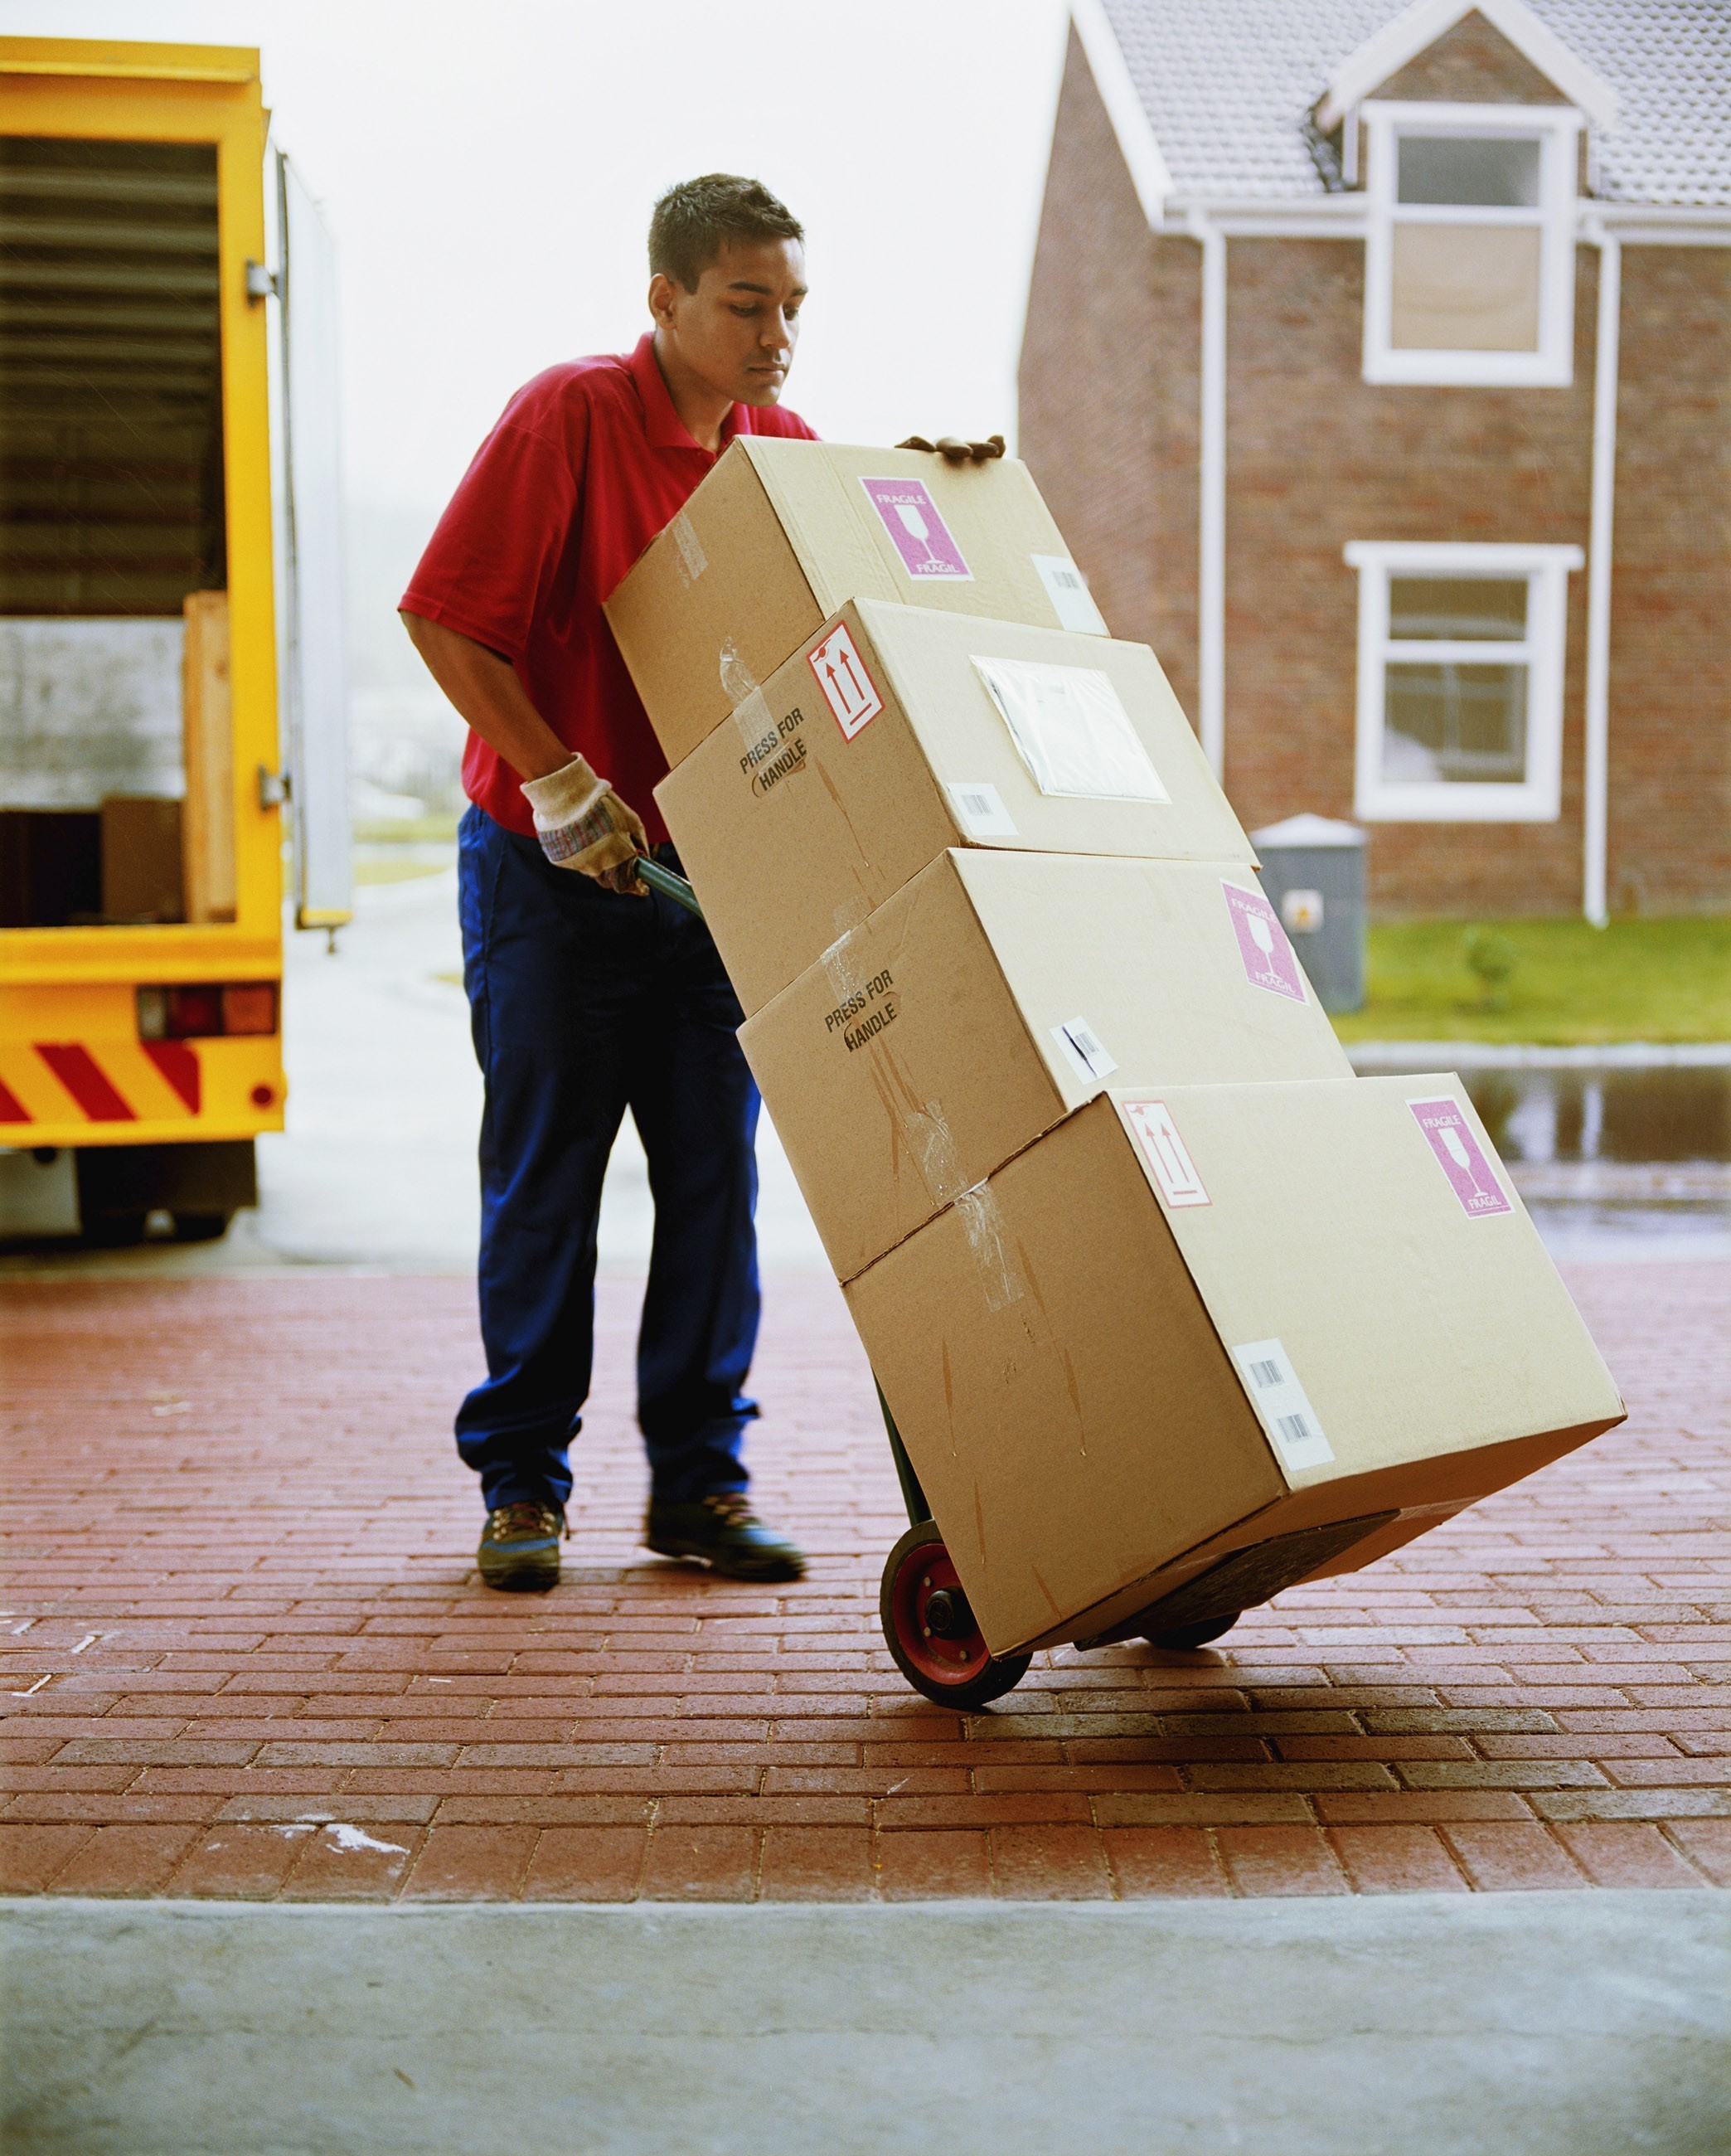 Packers and Movers Dubai Professional relocation services 